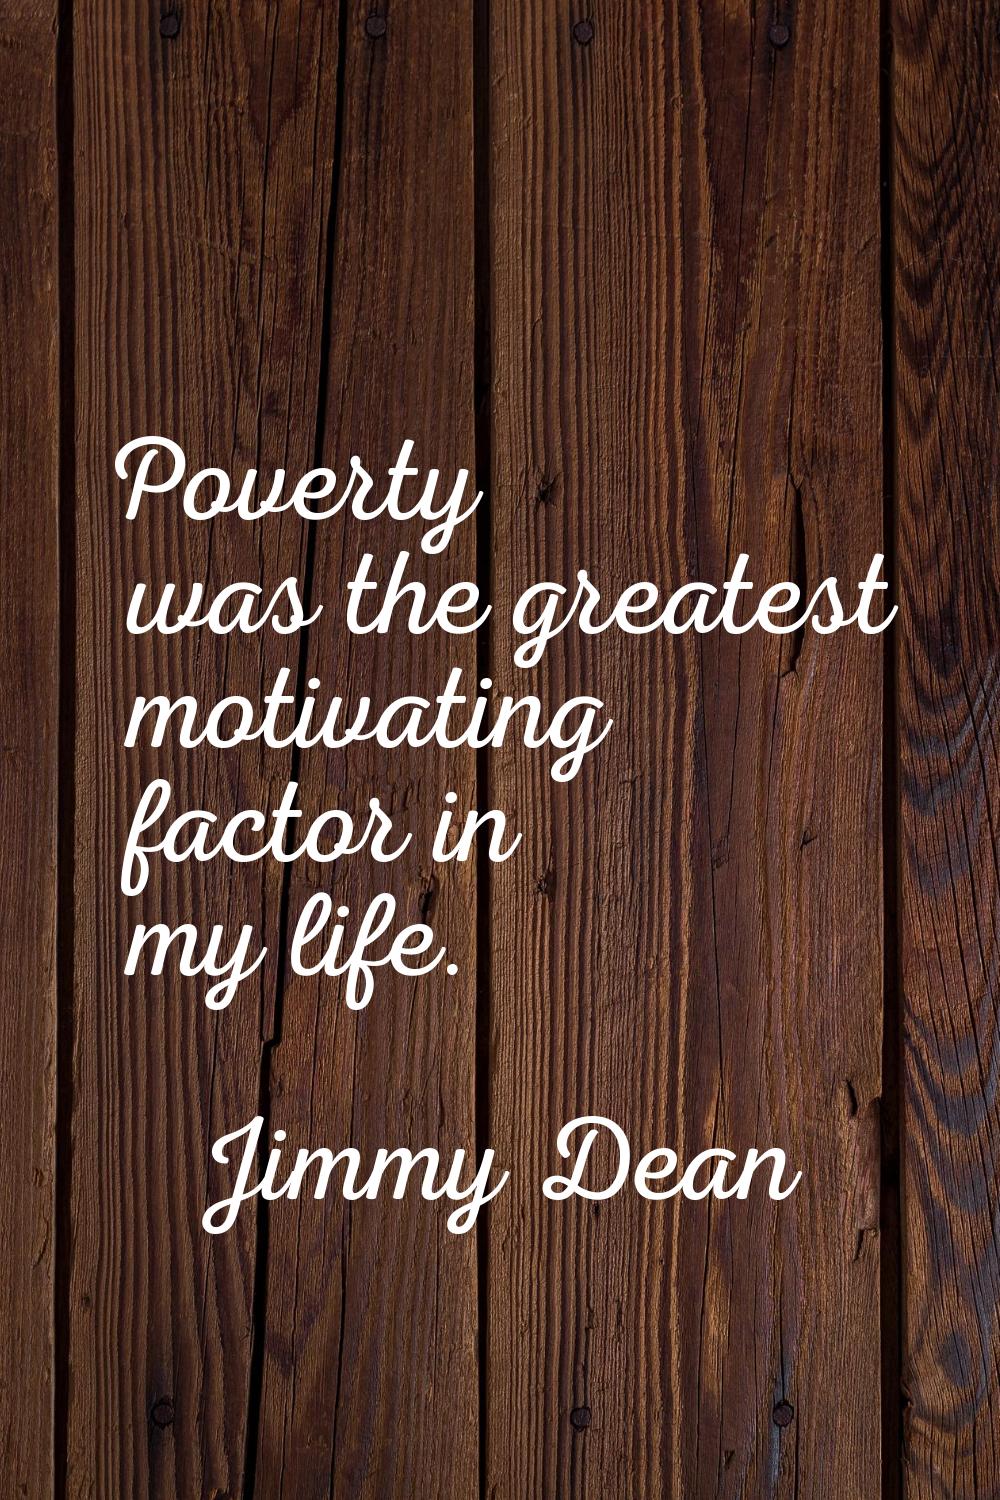 Poverty was the greatest motivating factor in my life.